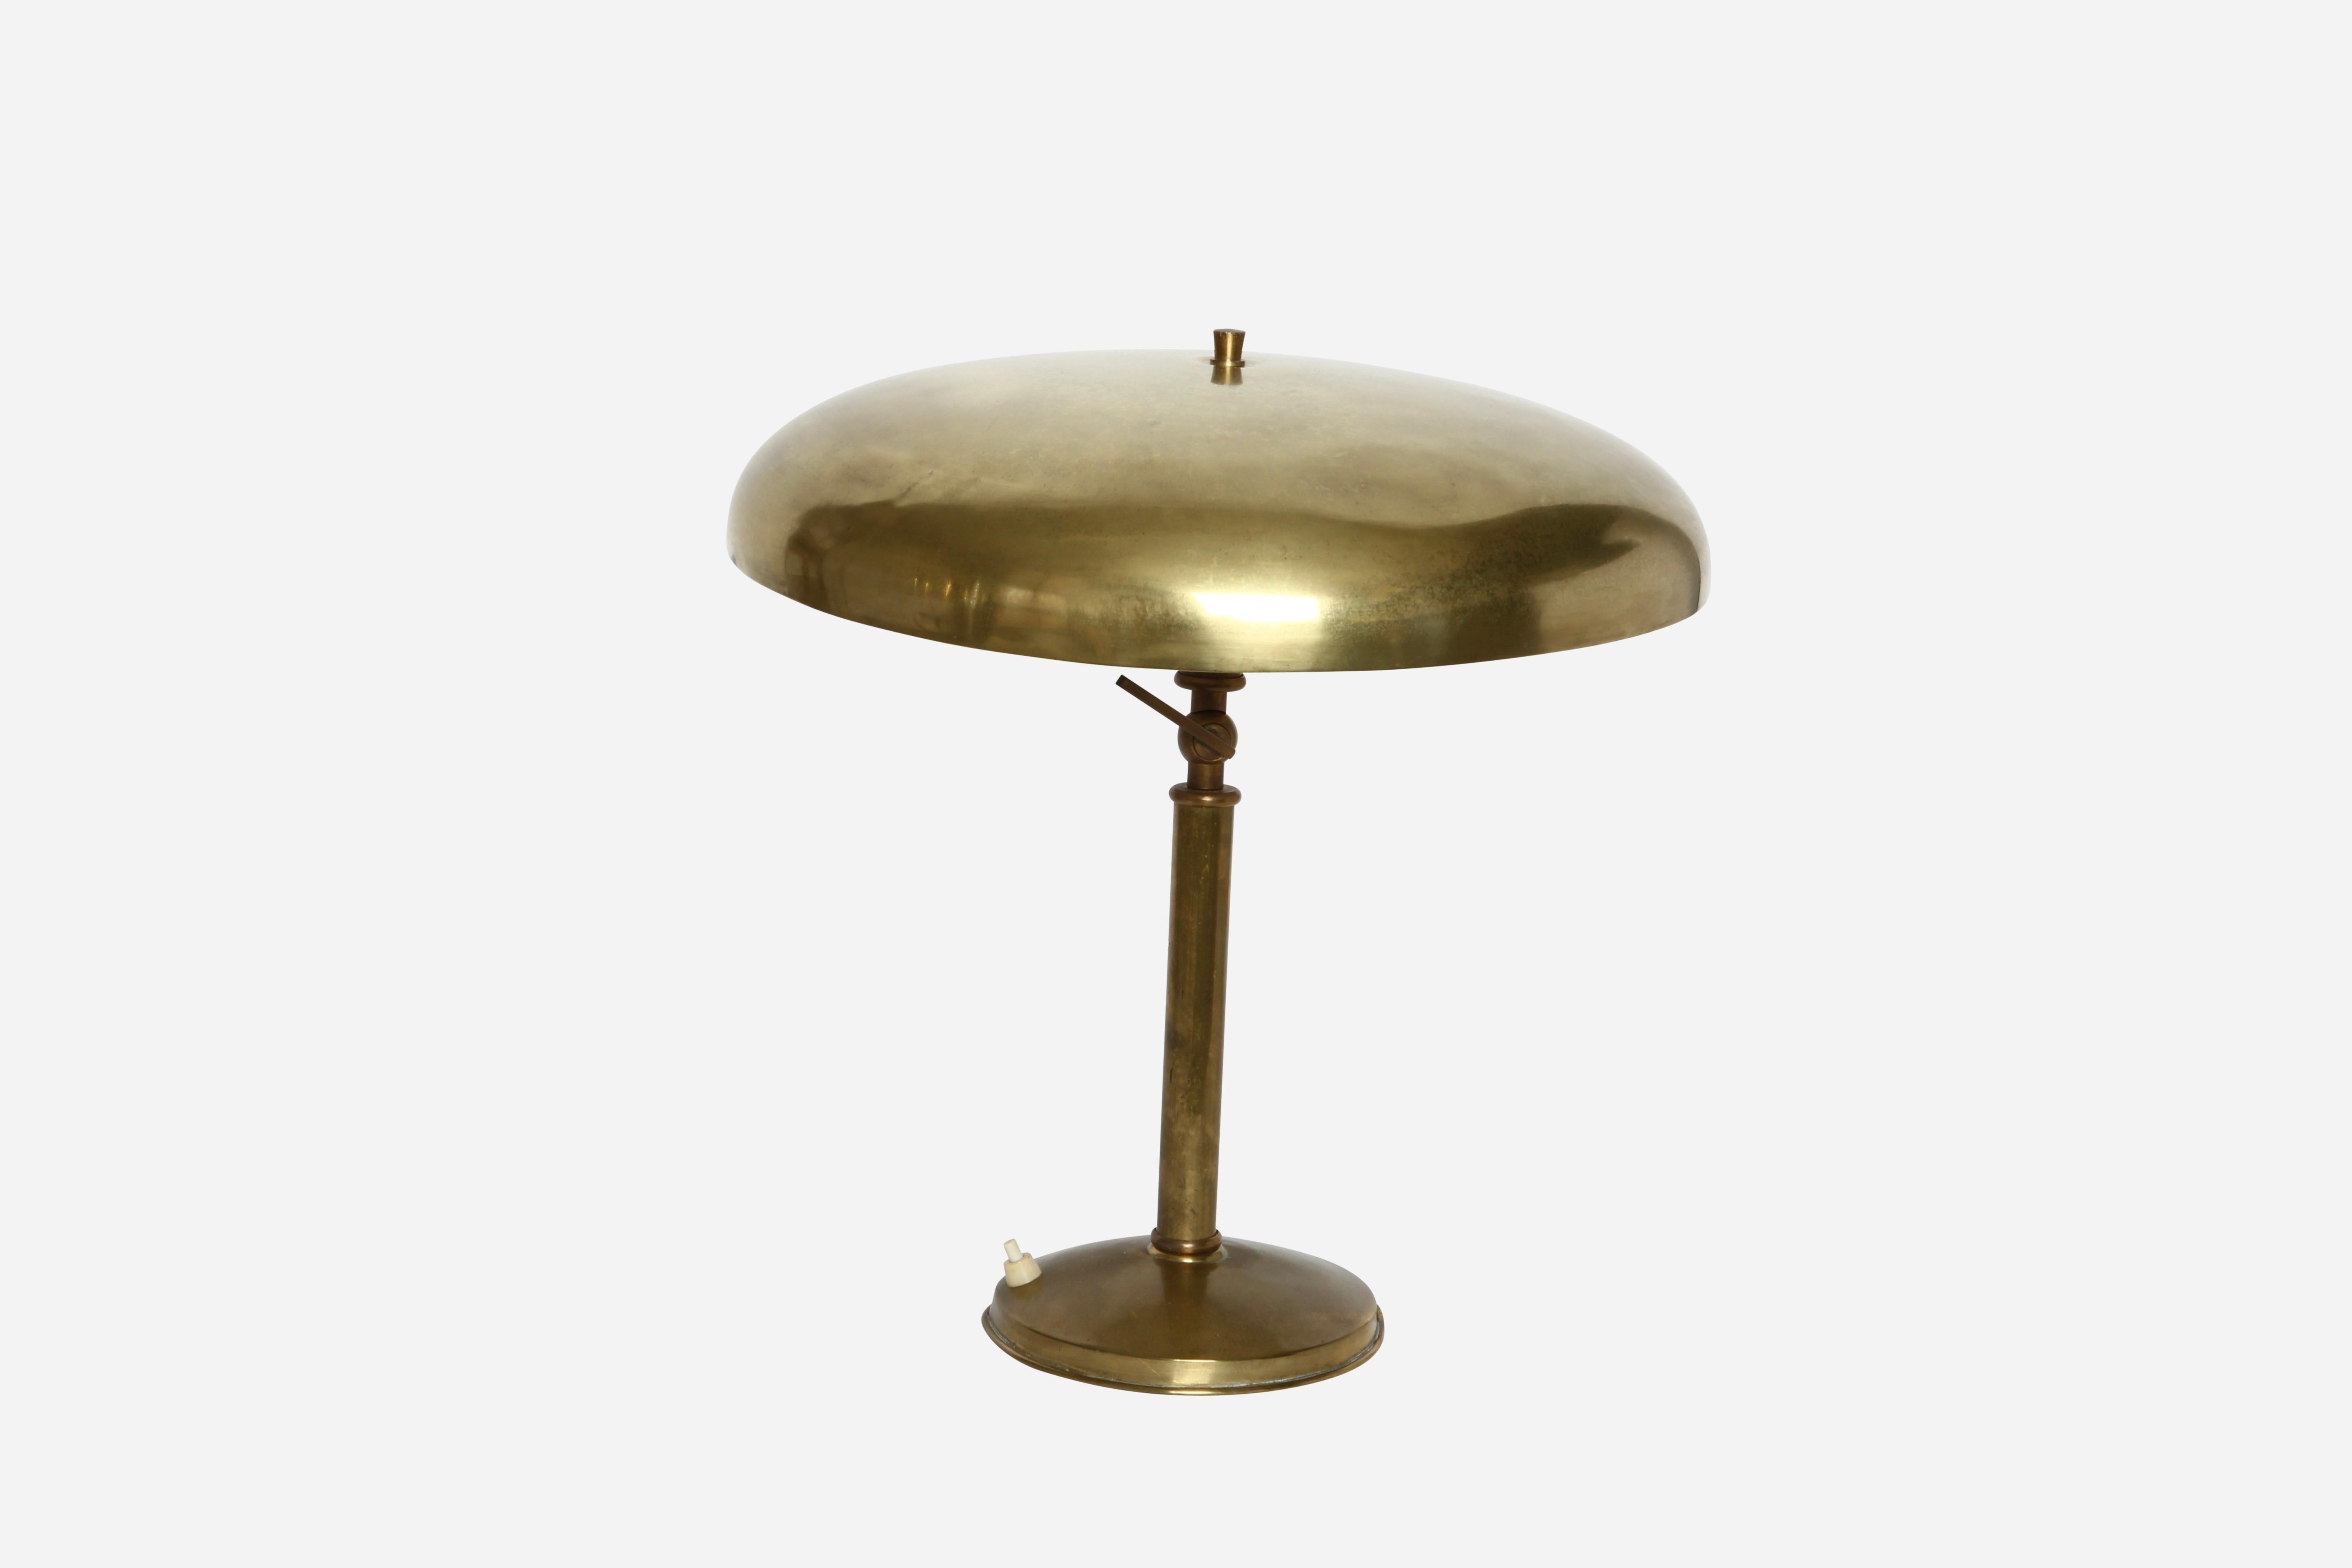 Oscar Torlasco attributed brass table lamp
Designed and made in Italy in 1960s
2 candelabra sockets
Rewired for US.

We take pride in bringing vintage fixtures to their full glory again.
At Illustris Lighting our main focus is to deliver lighting